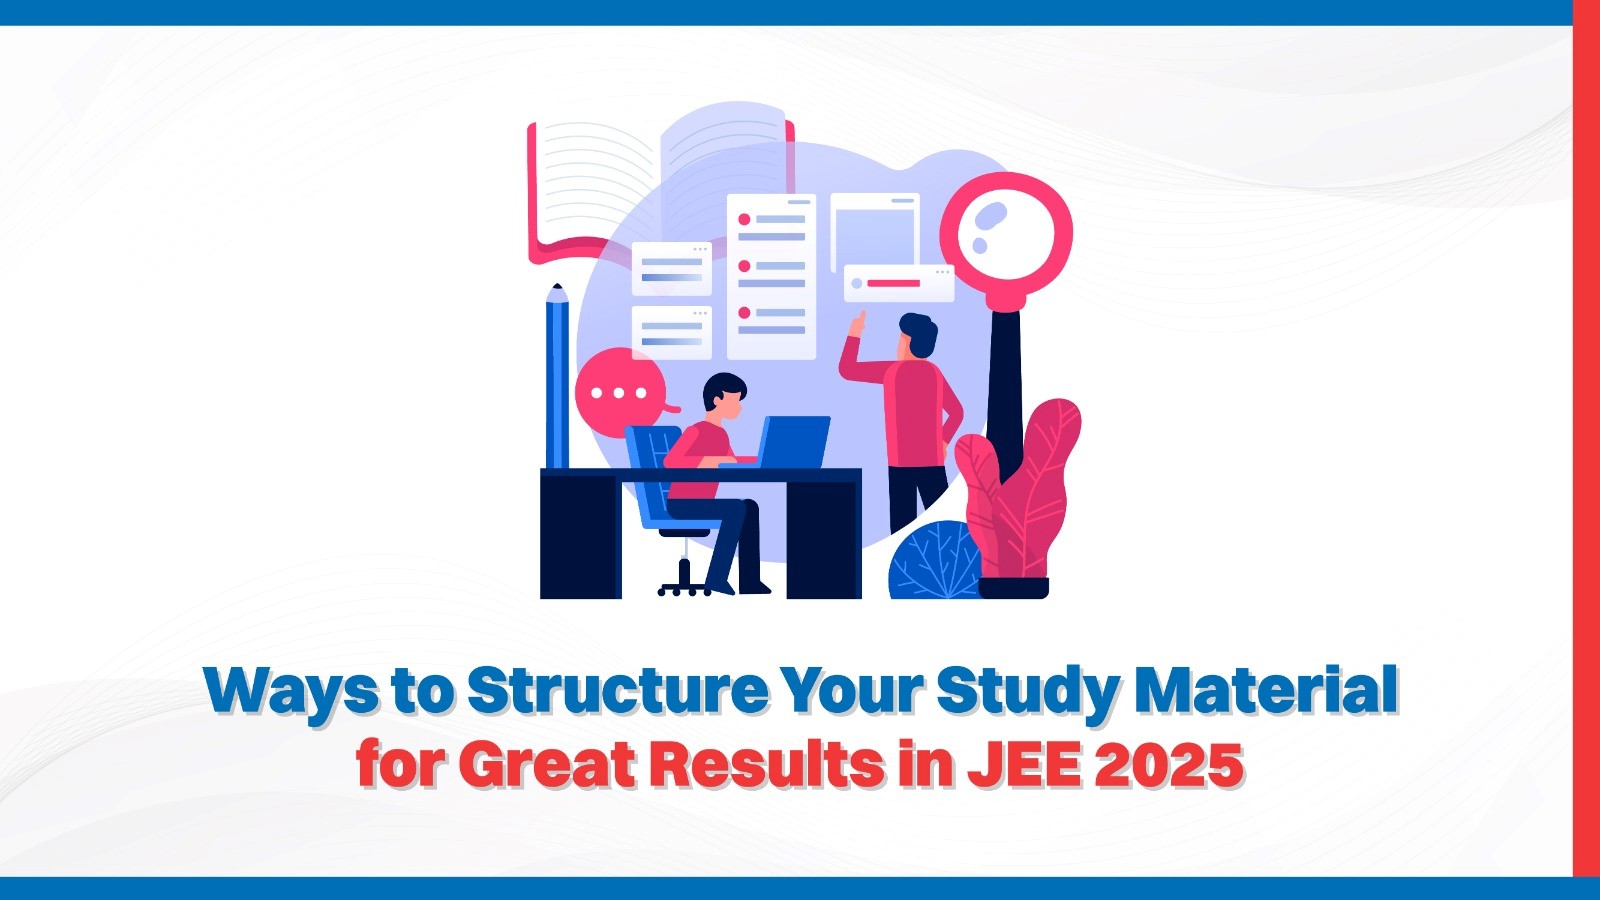 Ways to Structure Your Study Material for Great Results in JEE 2025.jpg